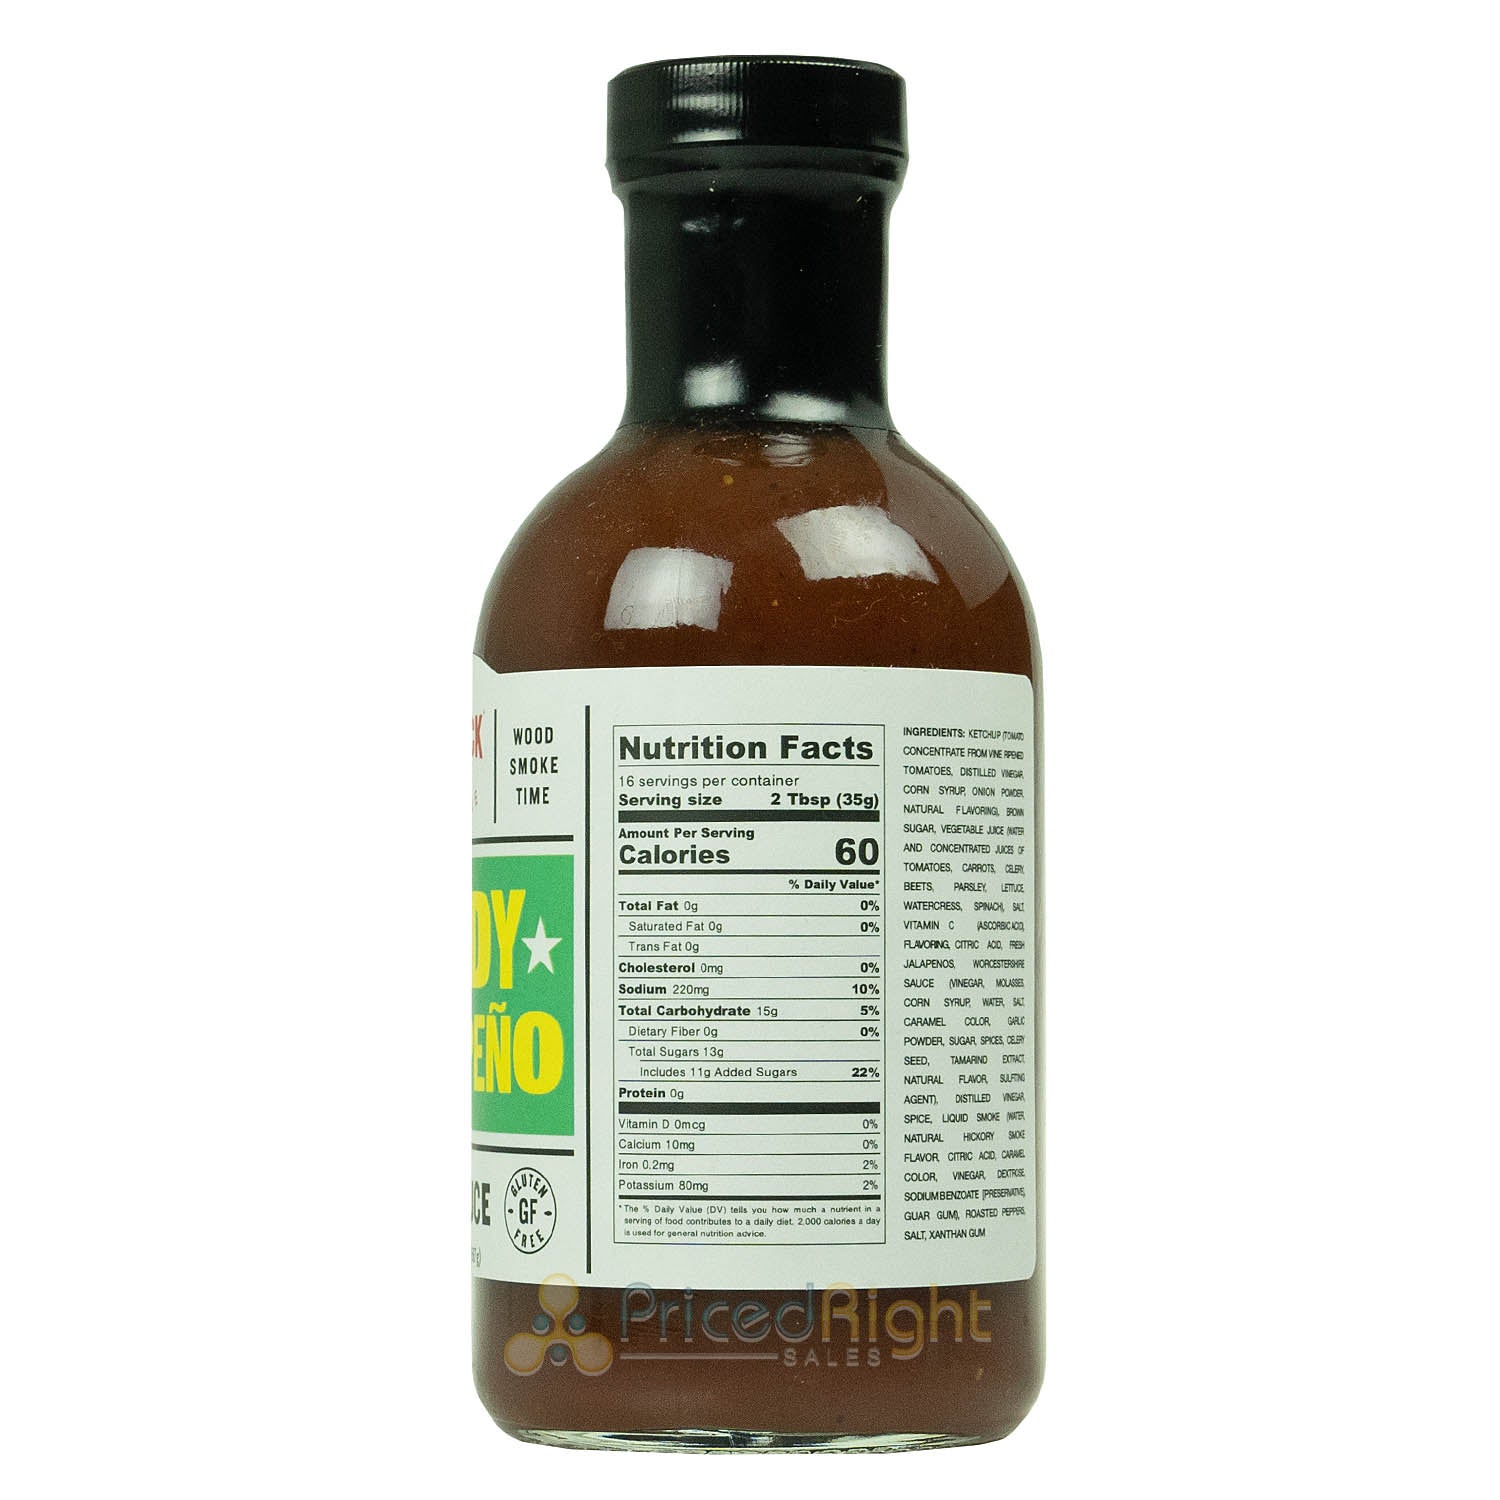 Gabrick Candy Jalapeno Barbeque Sauce Sweet Flavor Made With Real Jalapenos 20oz